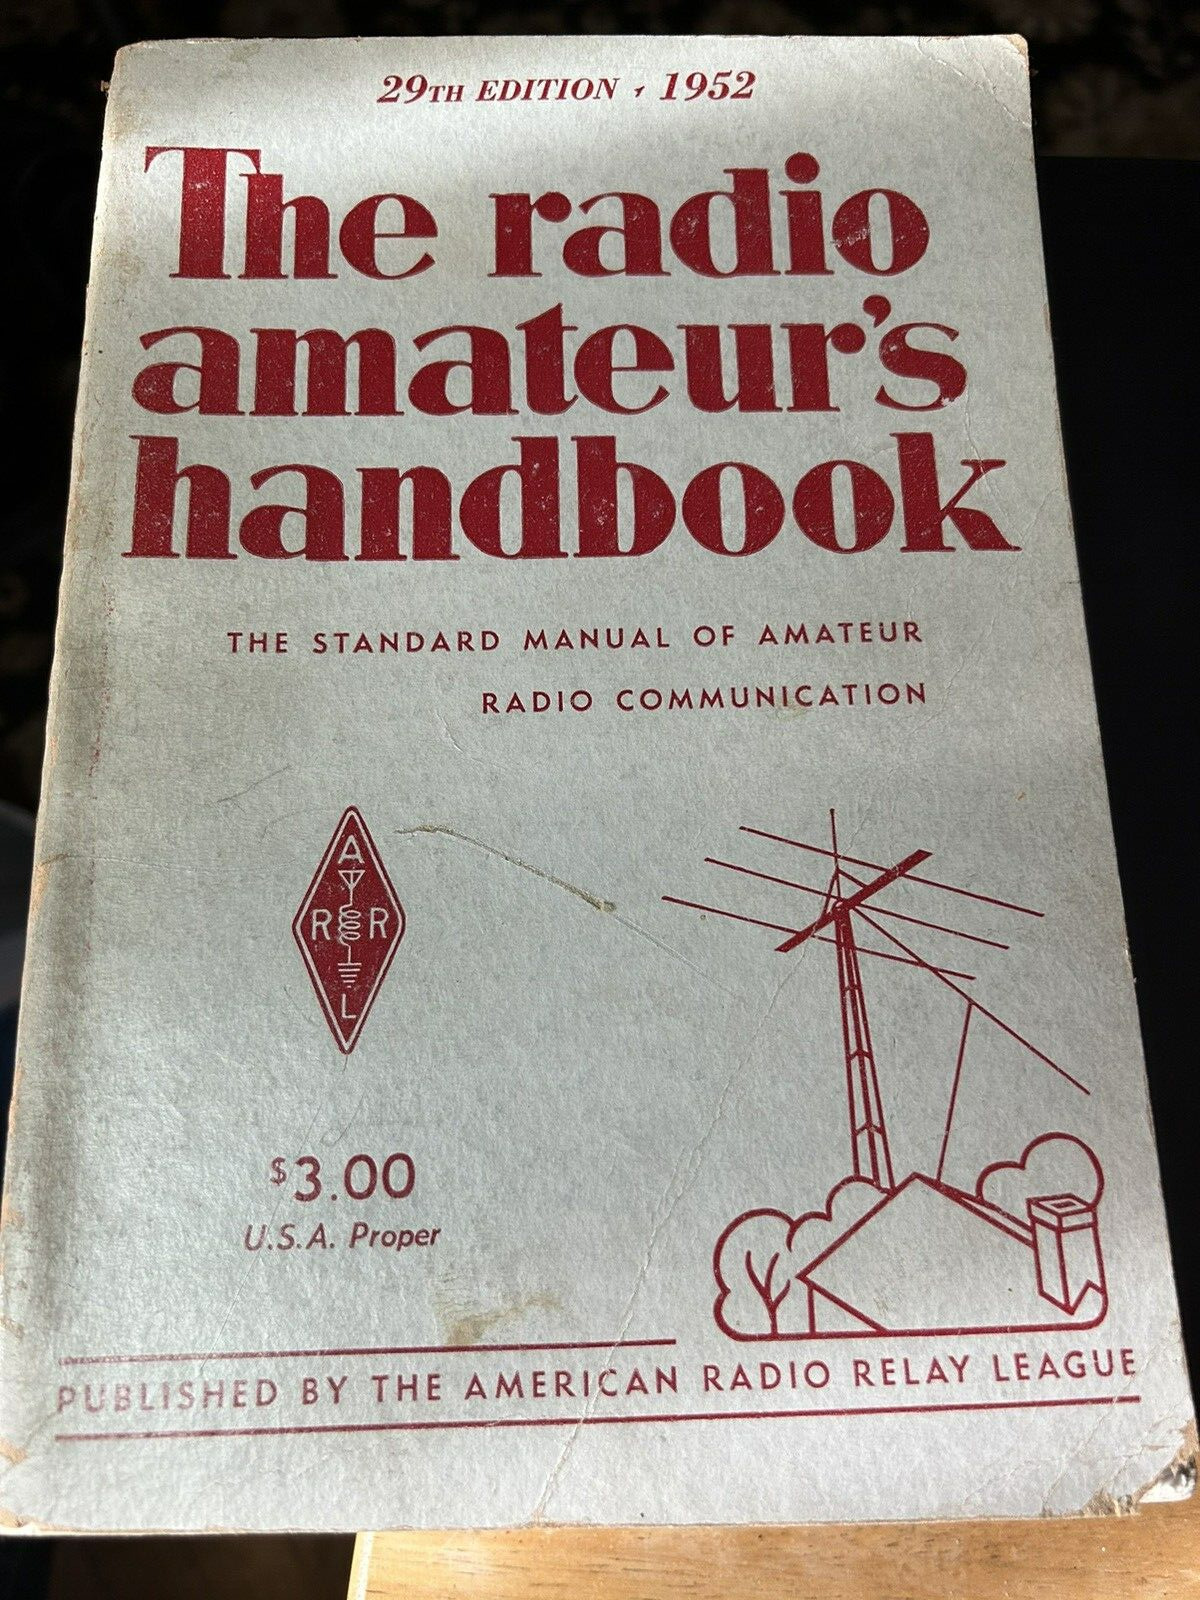 Softcover: The 1952 ARRL Handbook for the Radio Amateur